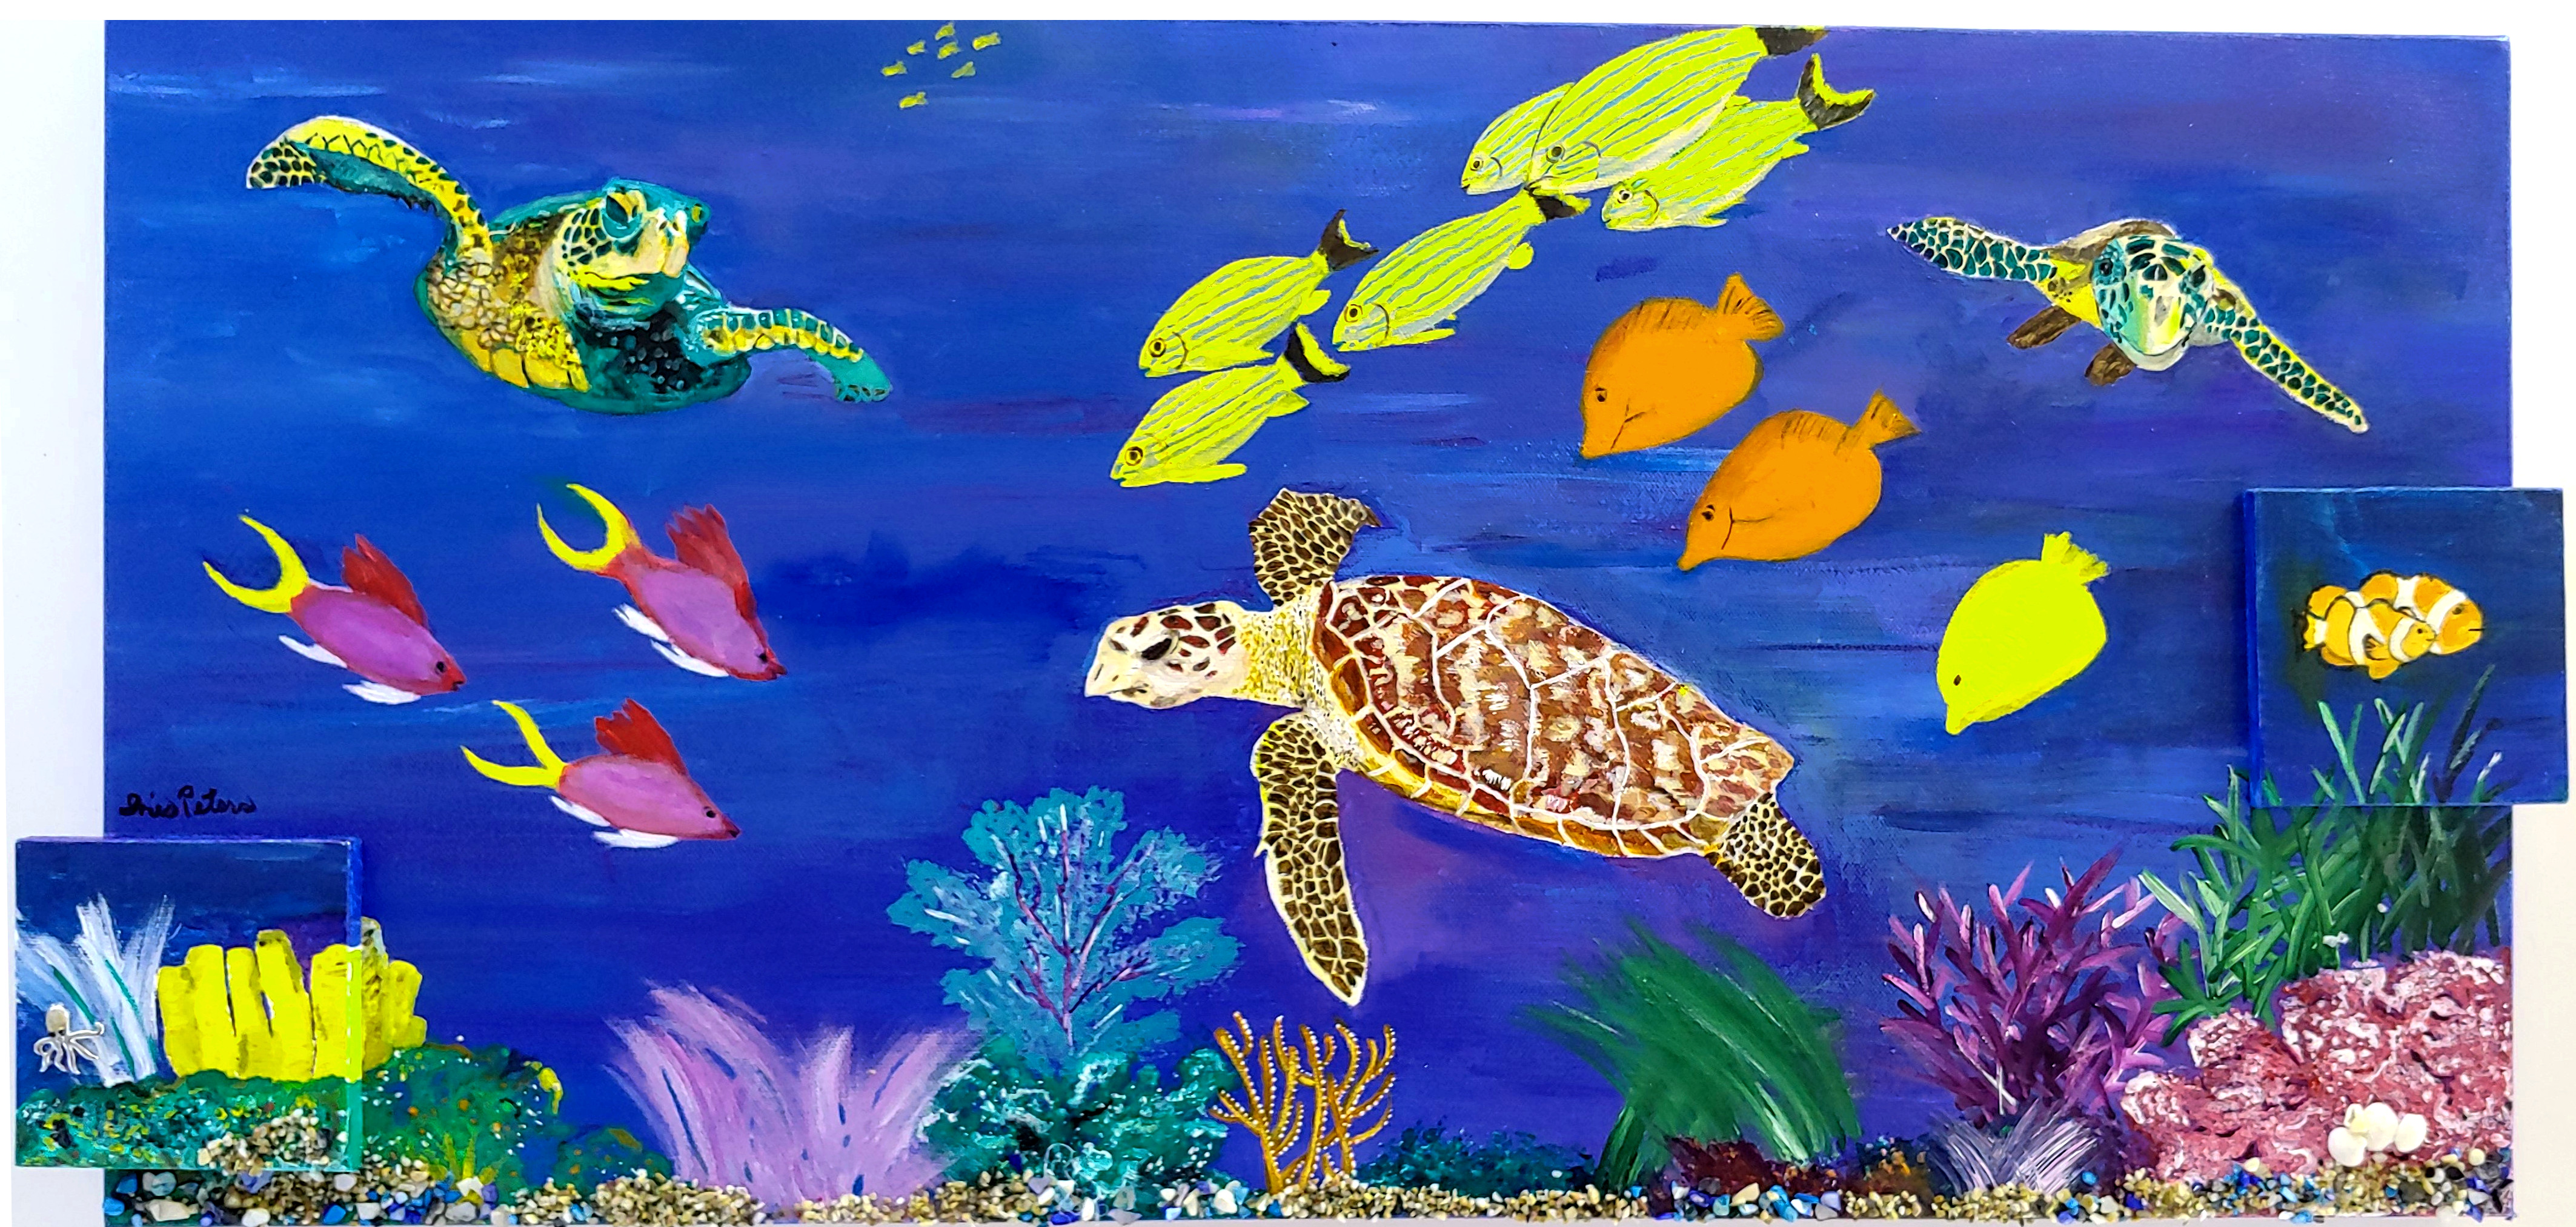 3 sea turtles and friends  30 x 15